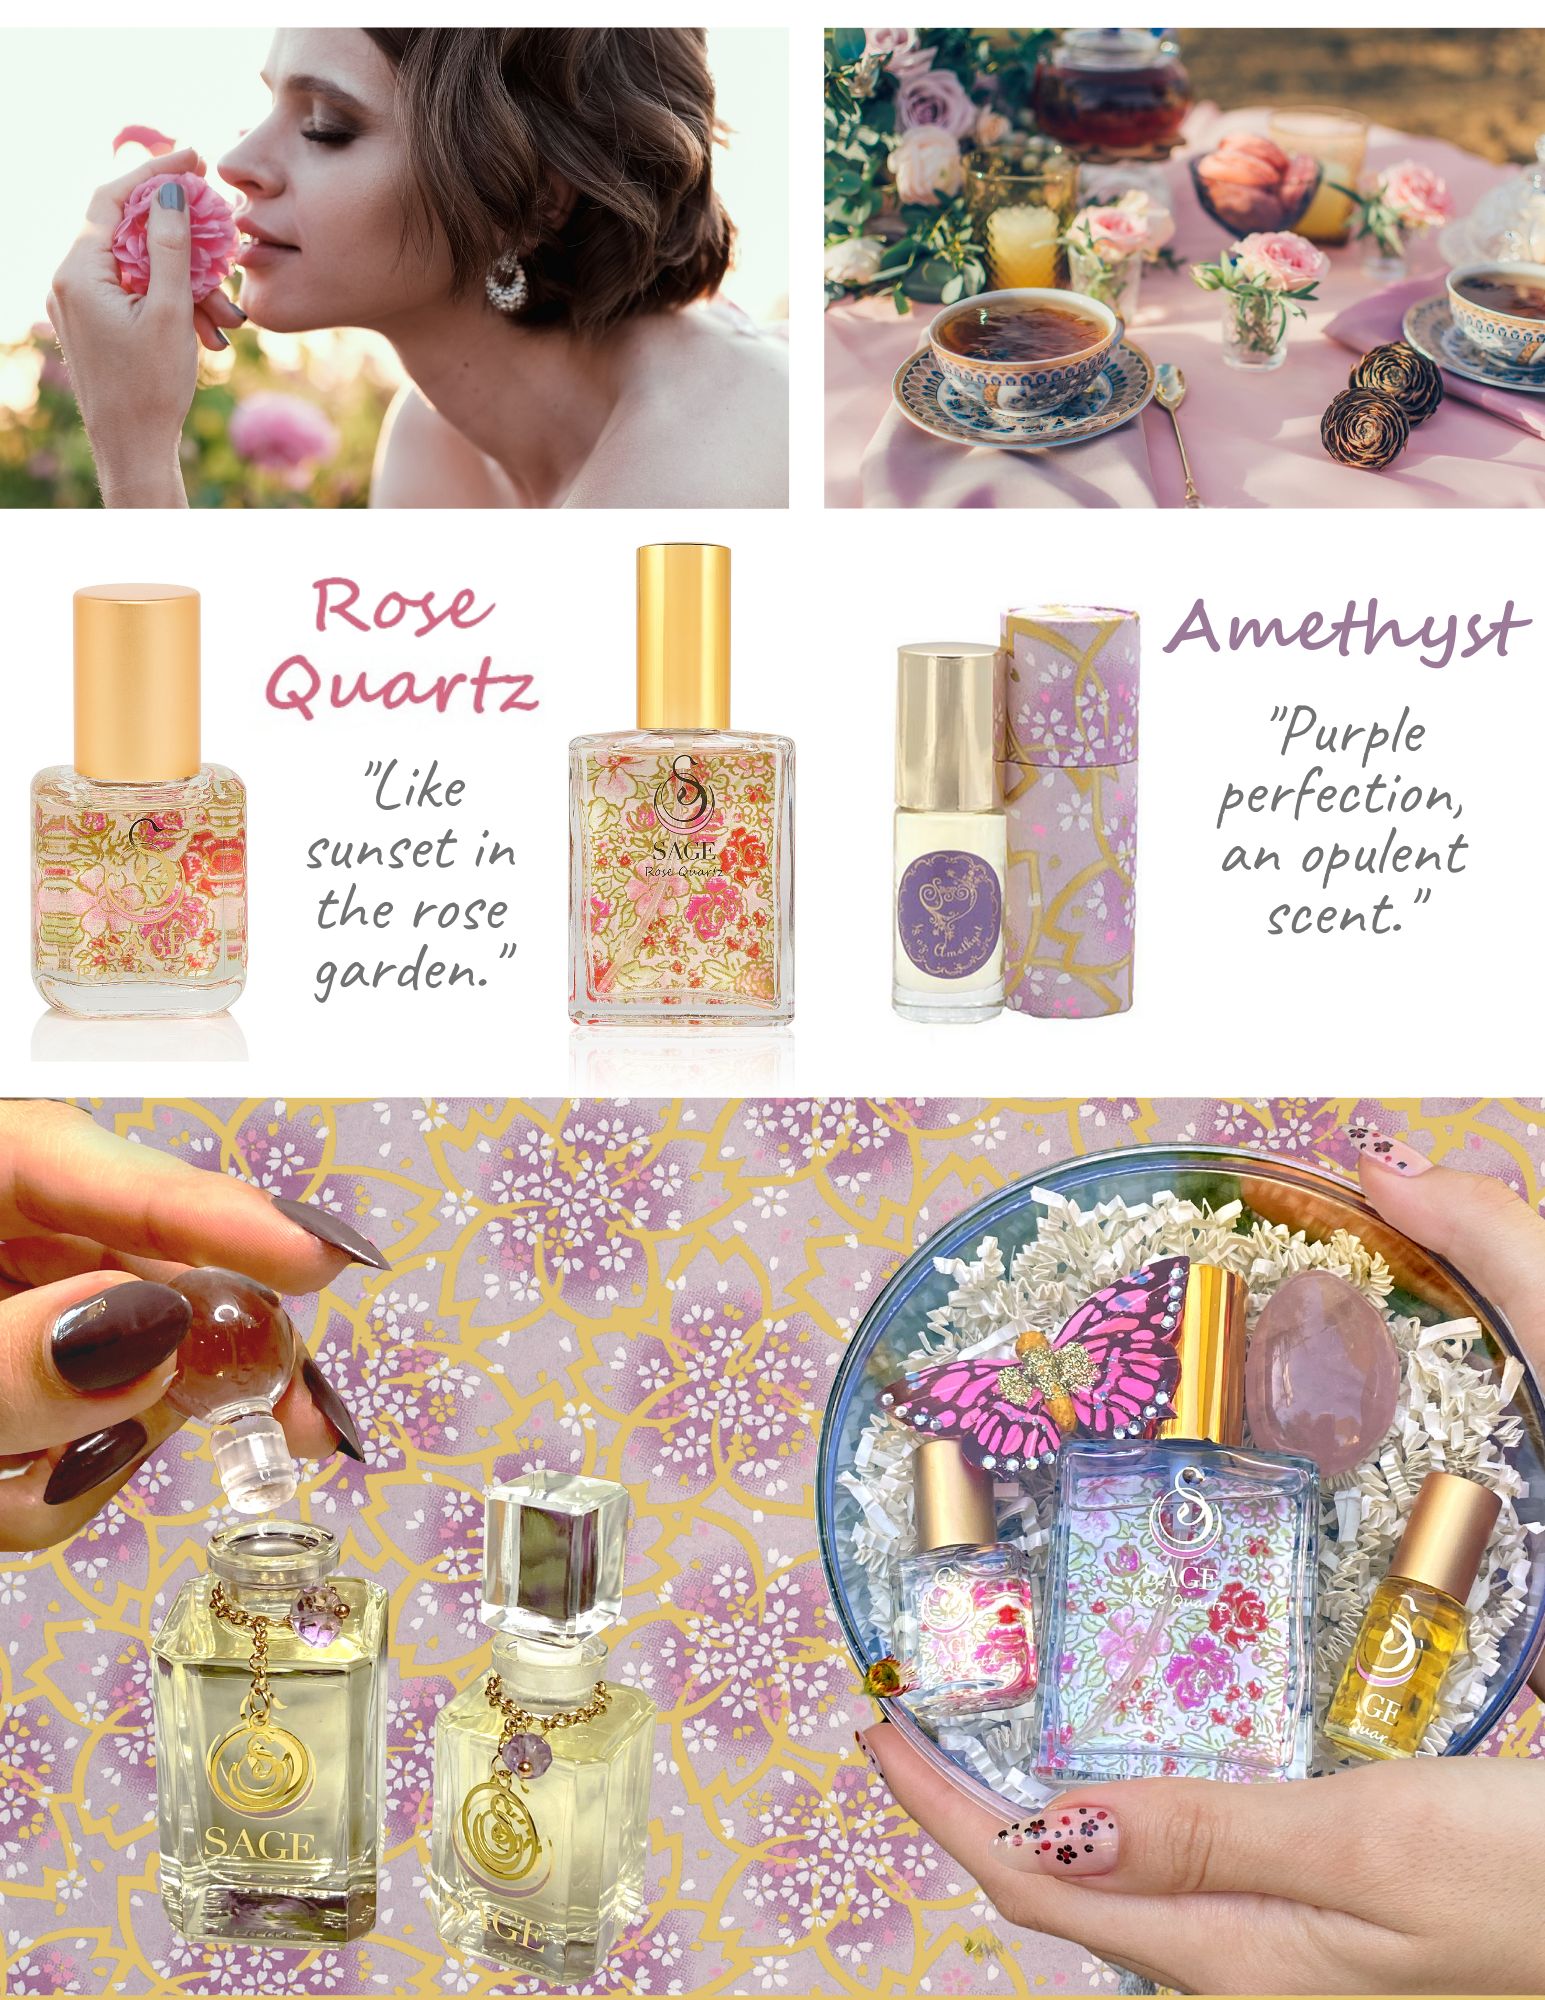 images of rose quartz and amethyst bottles with text “rose quartz like a sunset in the rose garden” “amethyst purple perfection an opulent scent”.